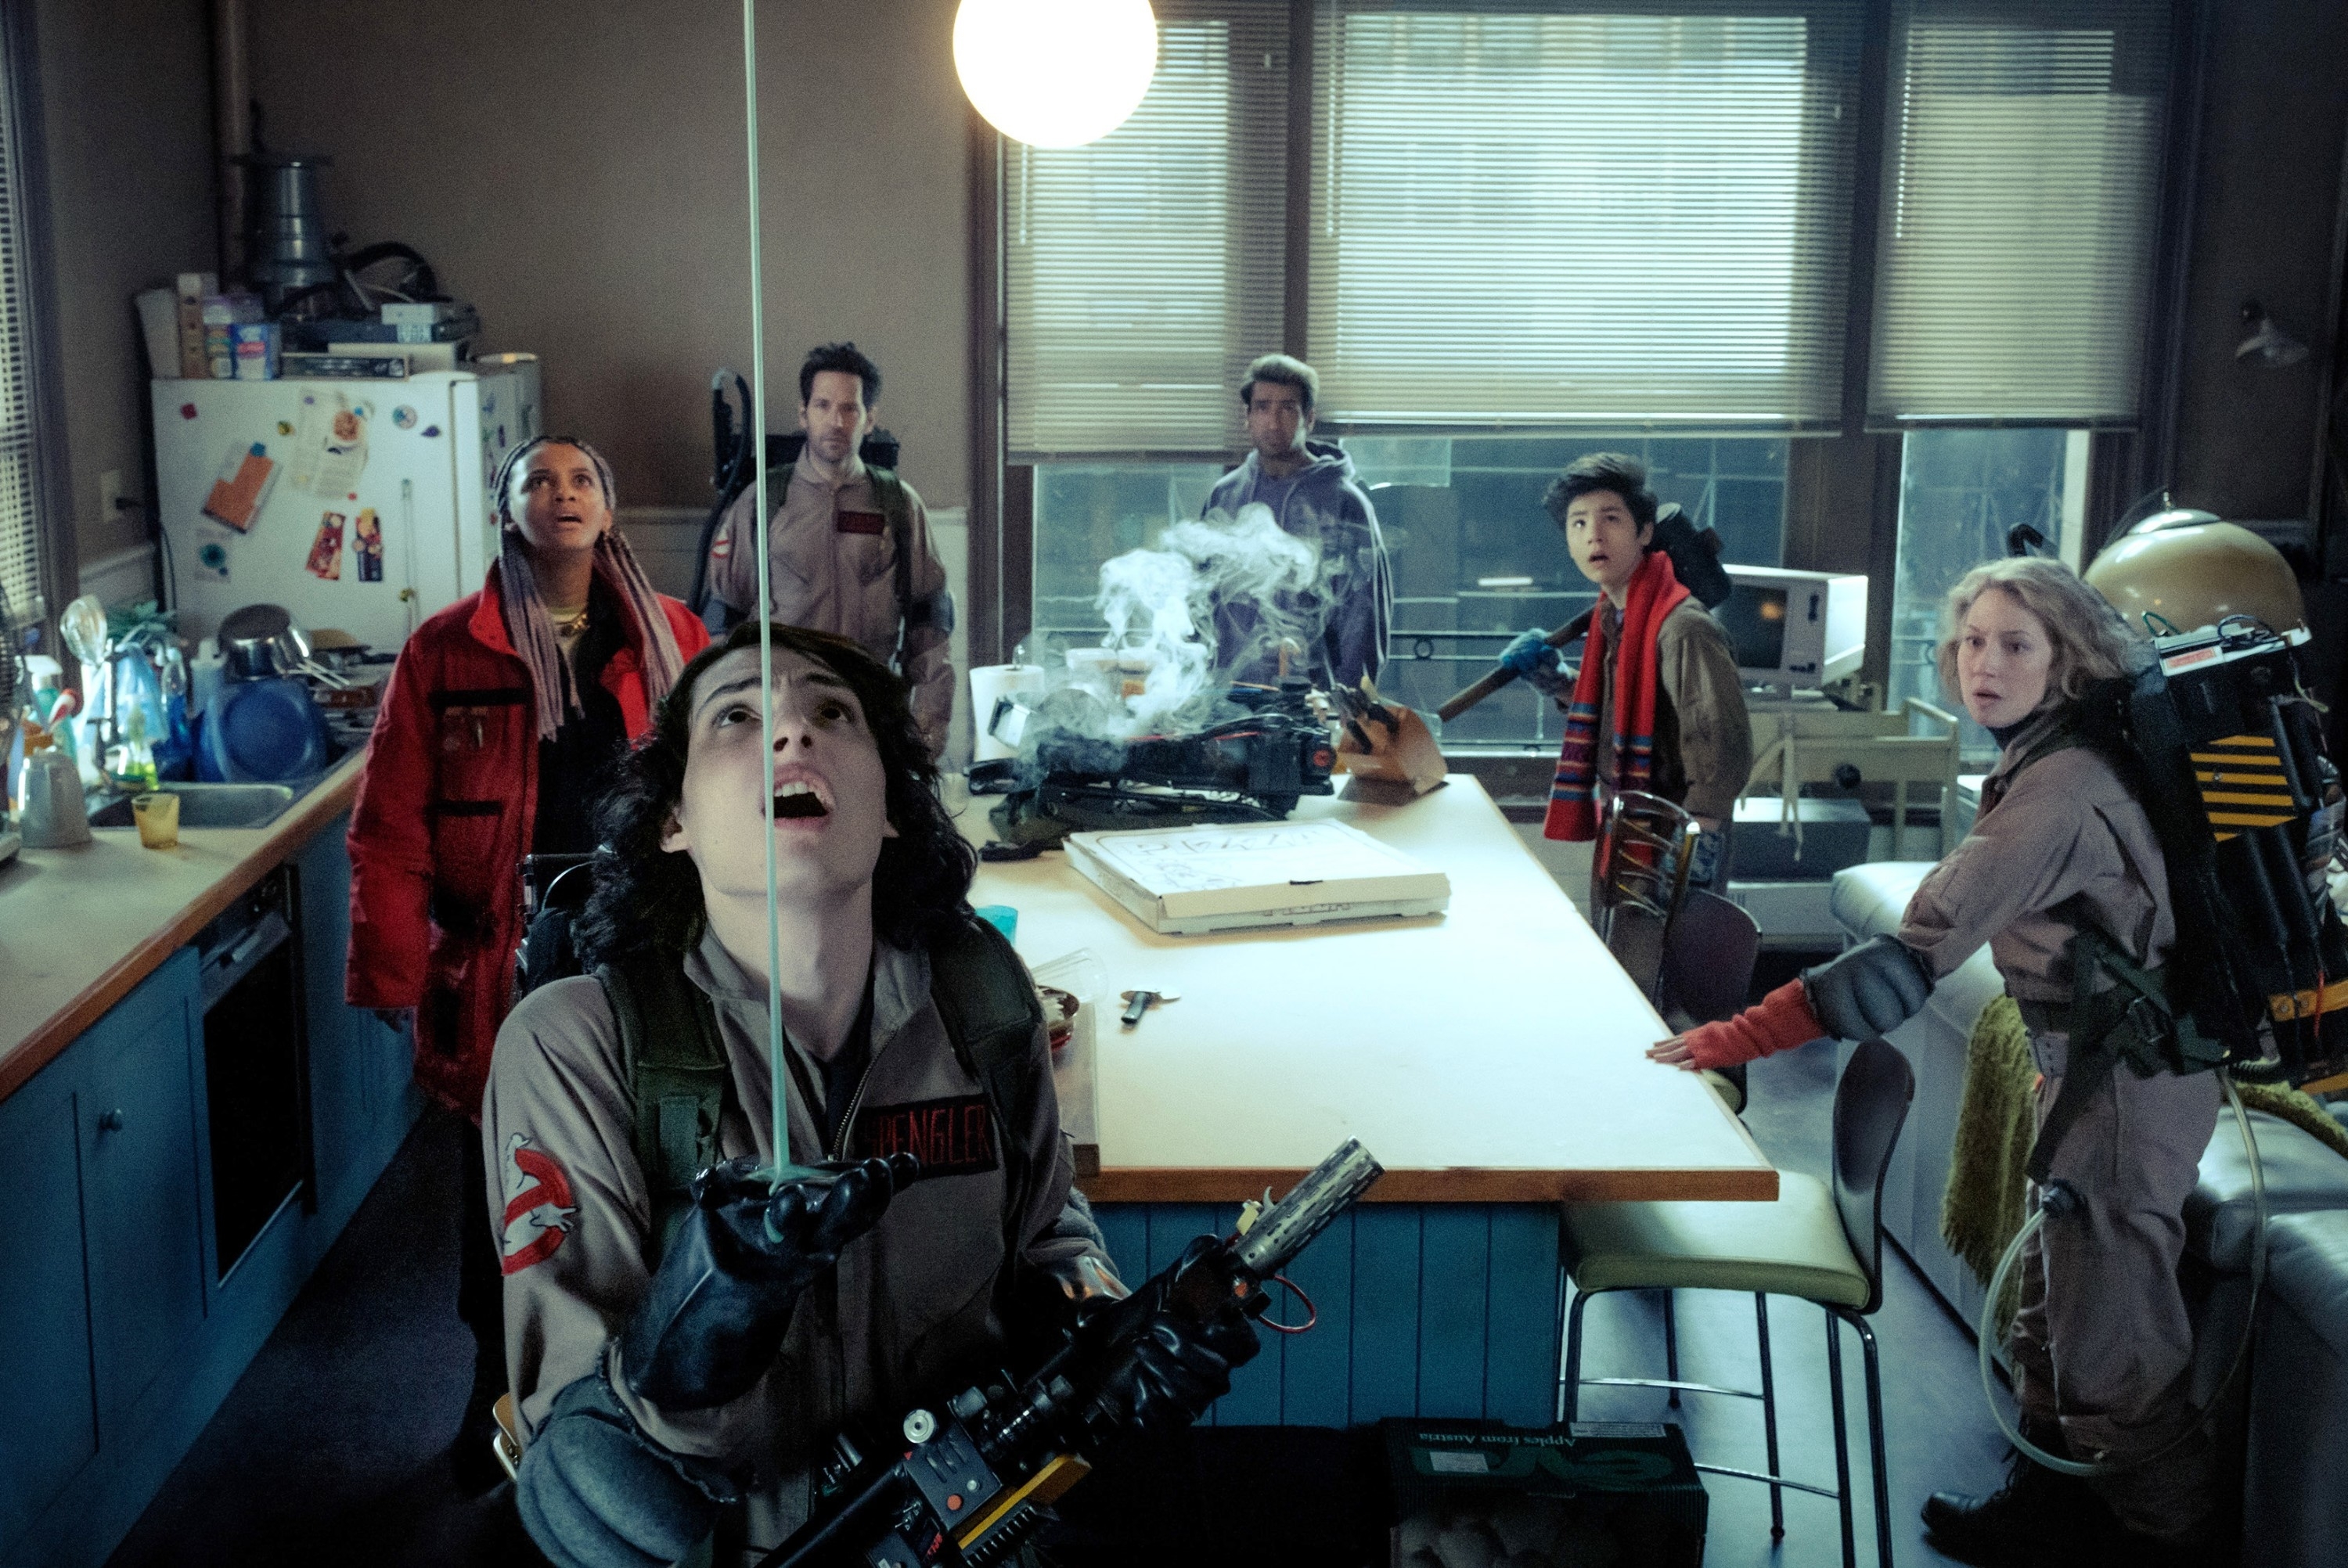 Finn Wolfhard, Mckenna Grace, and cast from &quot;Ghostbusters: Afterlife&quot; in a laboratory scene, dressed in ghostbuster uniforms, looking upward with gear in hand